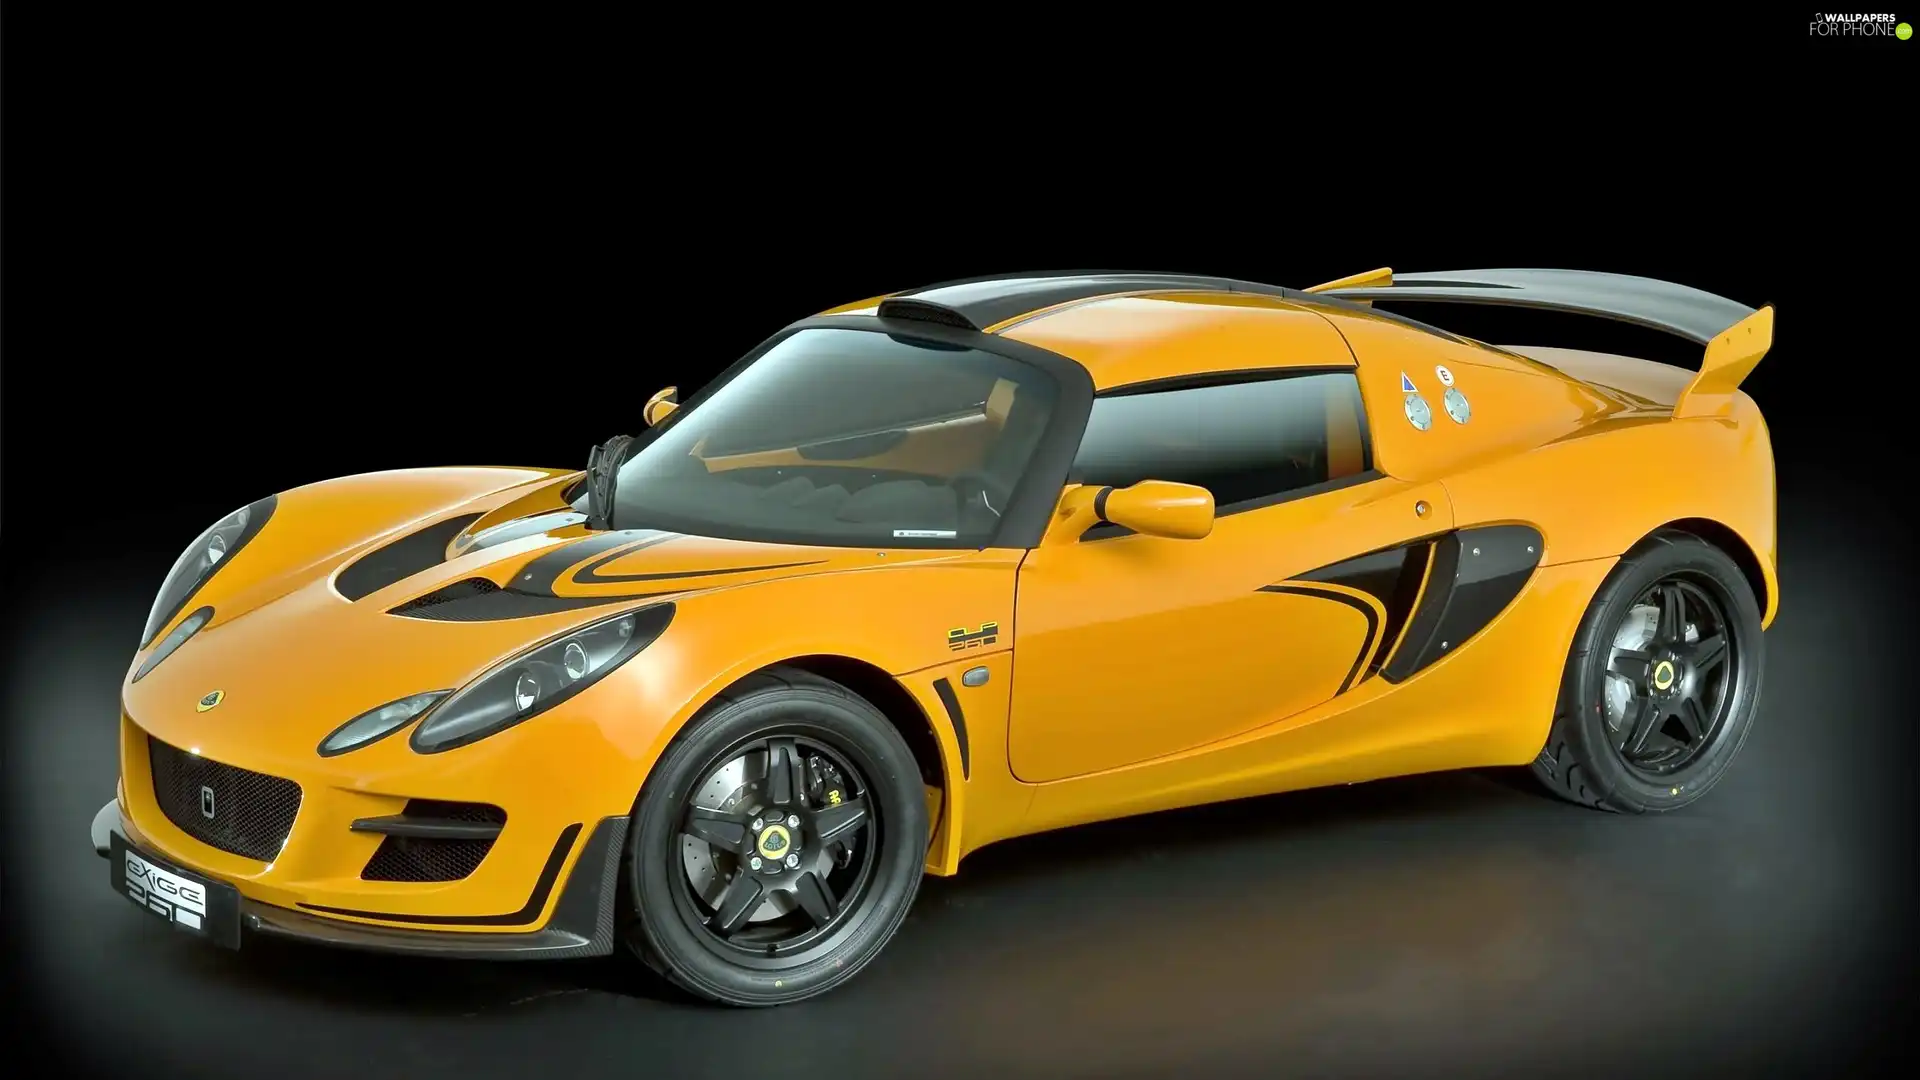 Lotus, Cup, Yellow, Exige